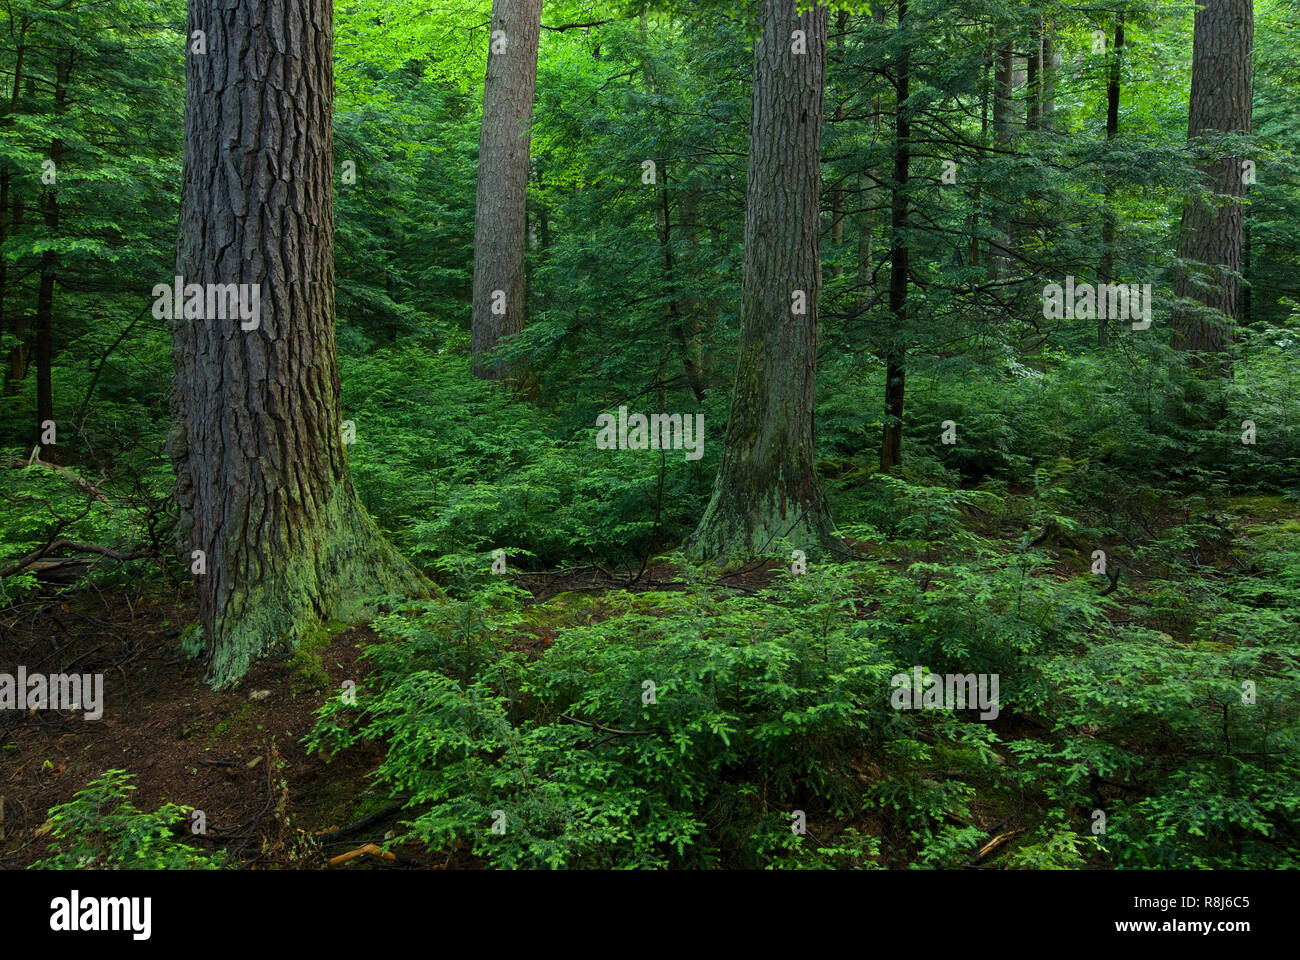 Virgin stand of eastern hemlock (Tsuga canadensis) in Rickett's Glen State Park in Pennsylvania. This park contains one of the largest stands of healt Stock Photo